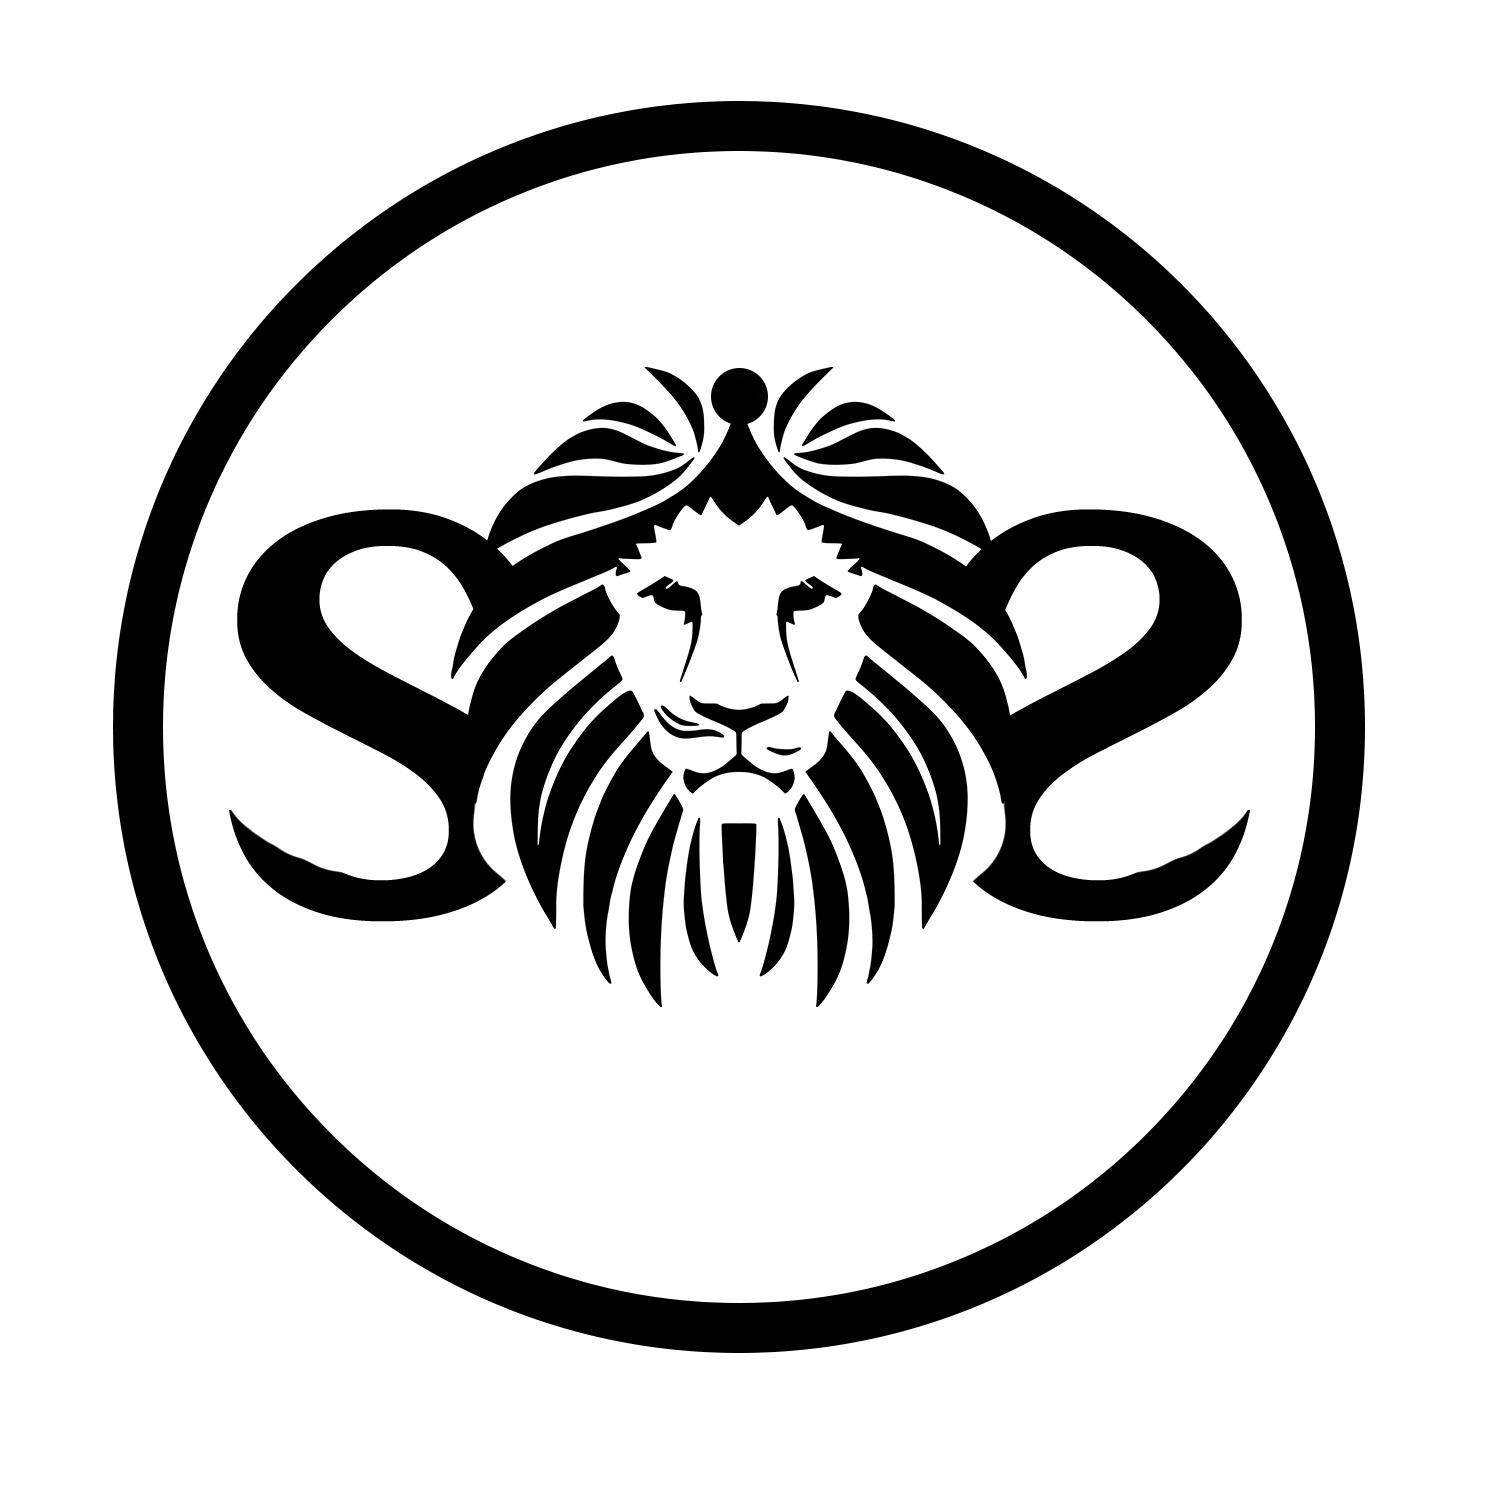 Official twitter handle for SOS Clothing inc Designed by @ManjMusik